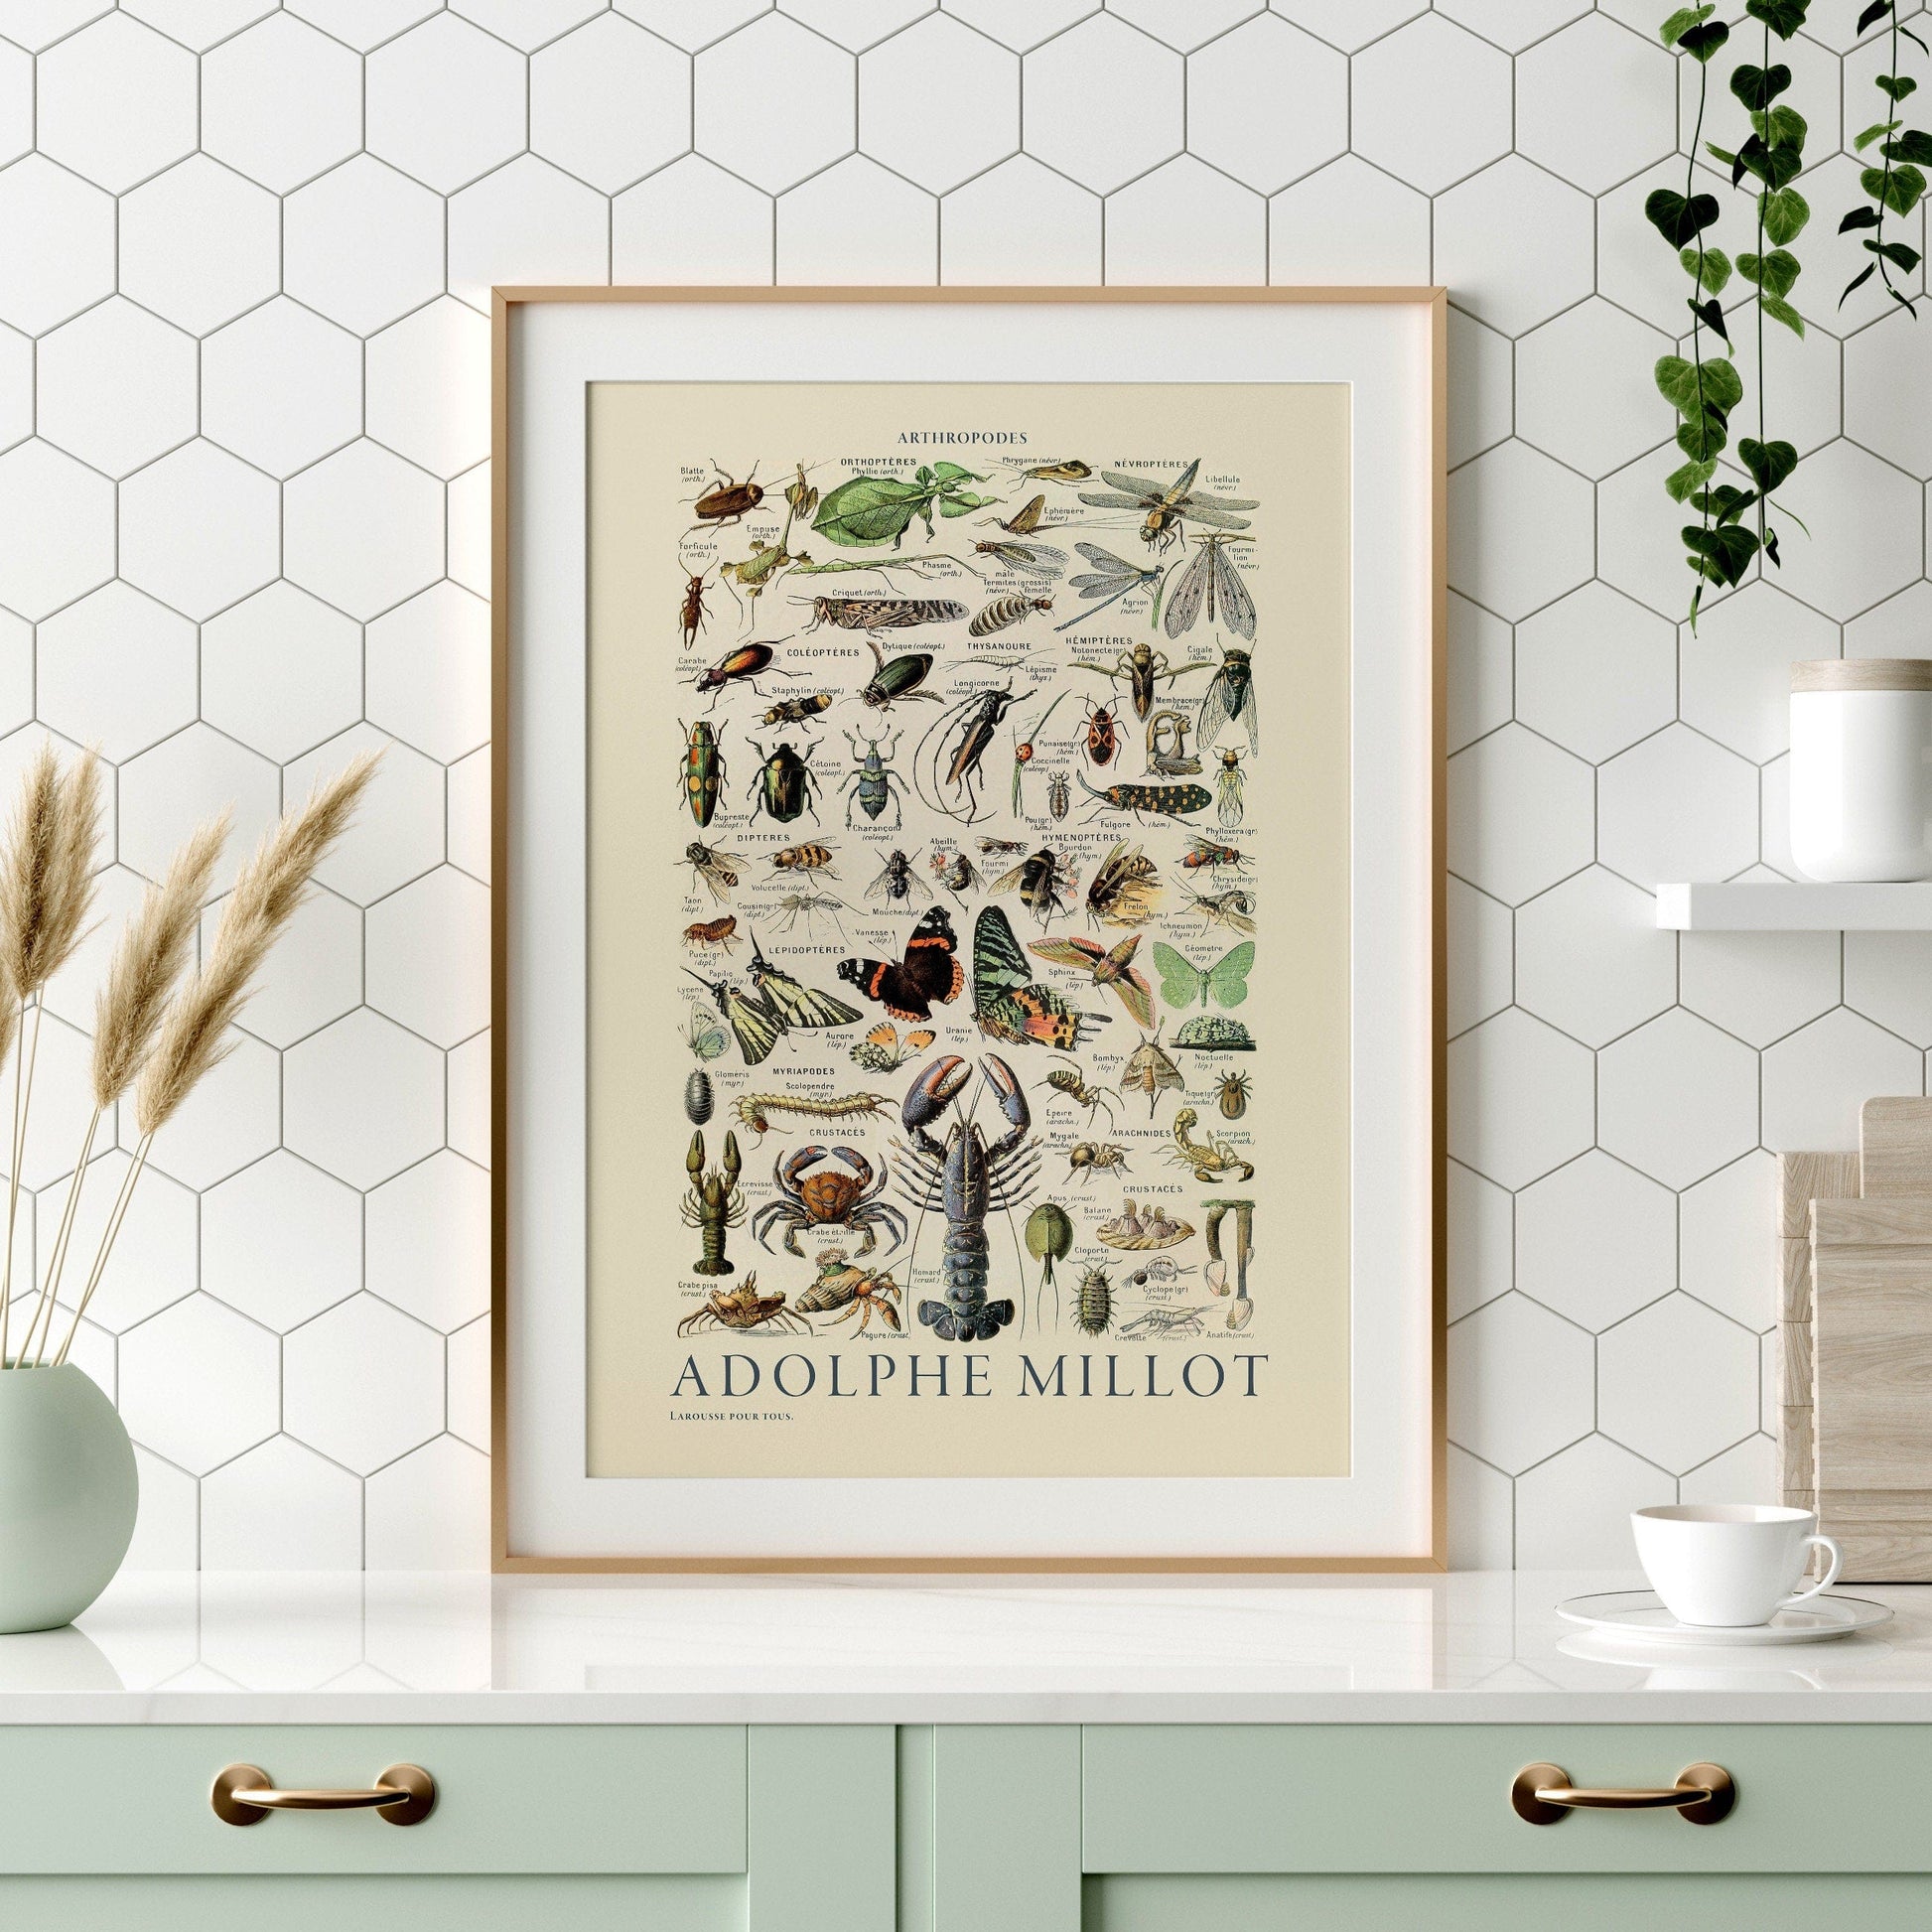 Home Poster Decor Vintage Print, Adolphe Millot Poster, Ocean Wall Art, Butterfly and Sea Life, High Quality Cotton Paper, 8x10, A2 50x70 60x90 18x24 24x36